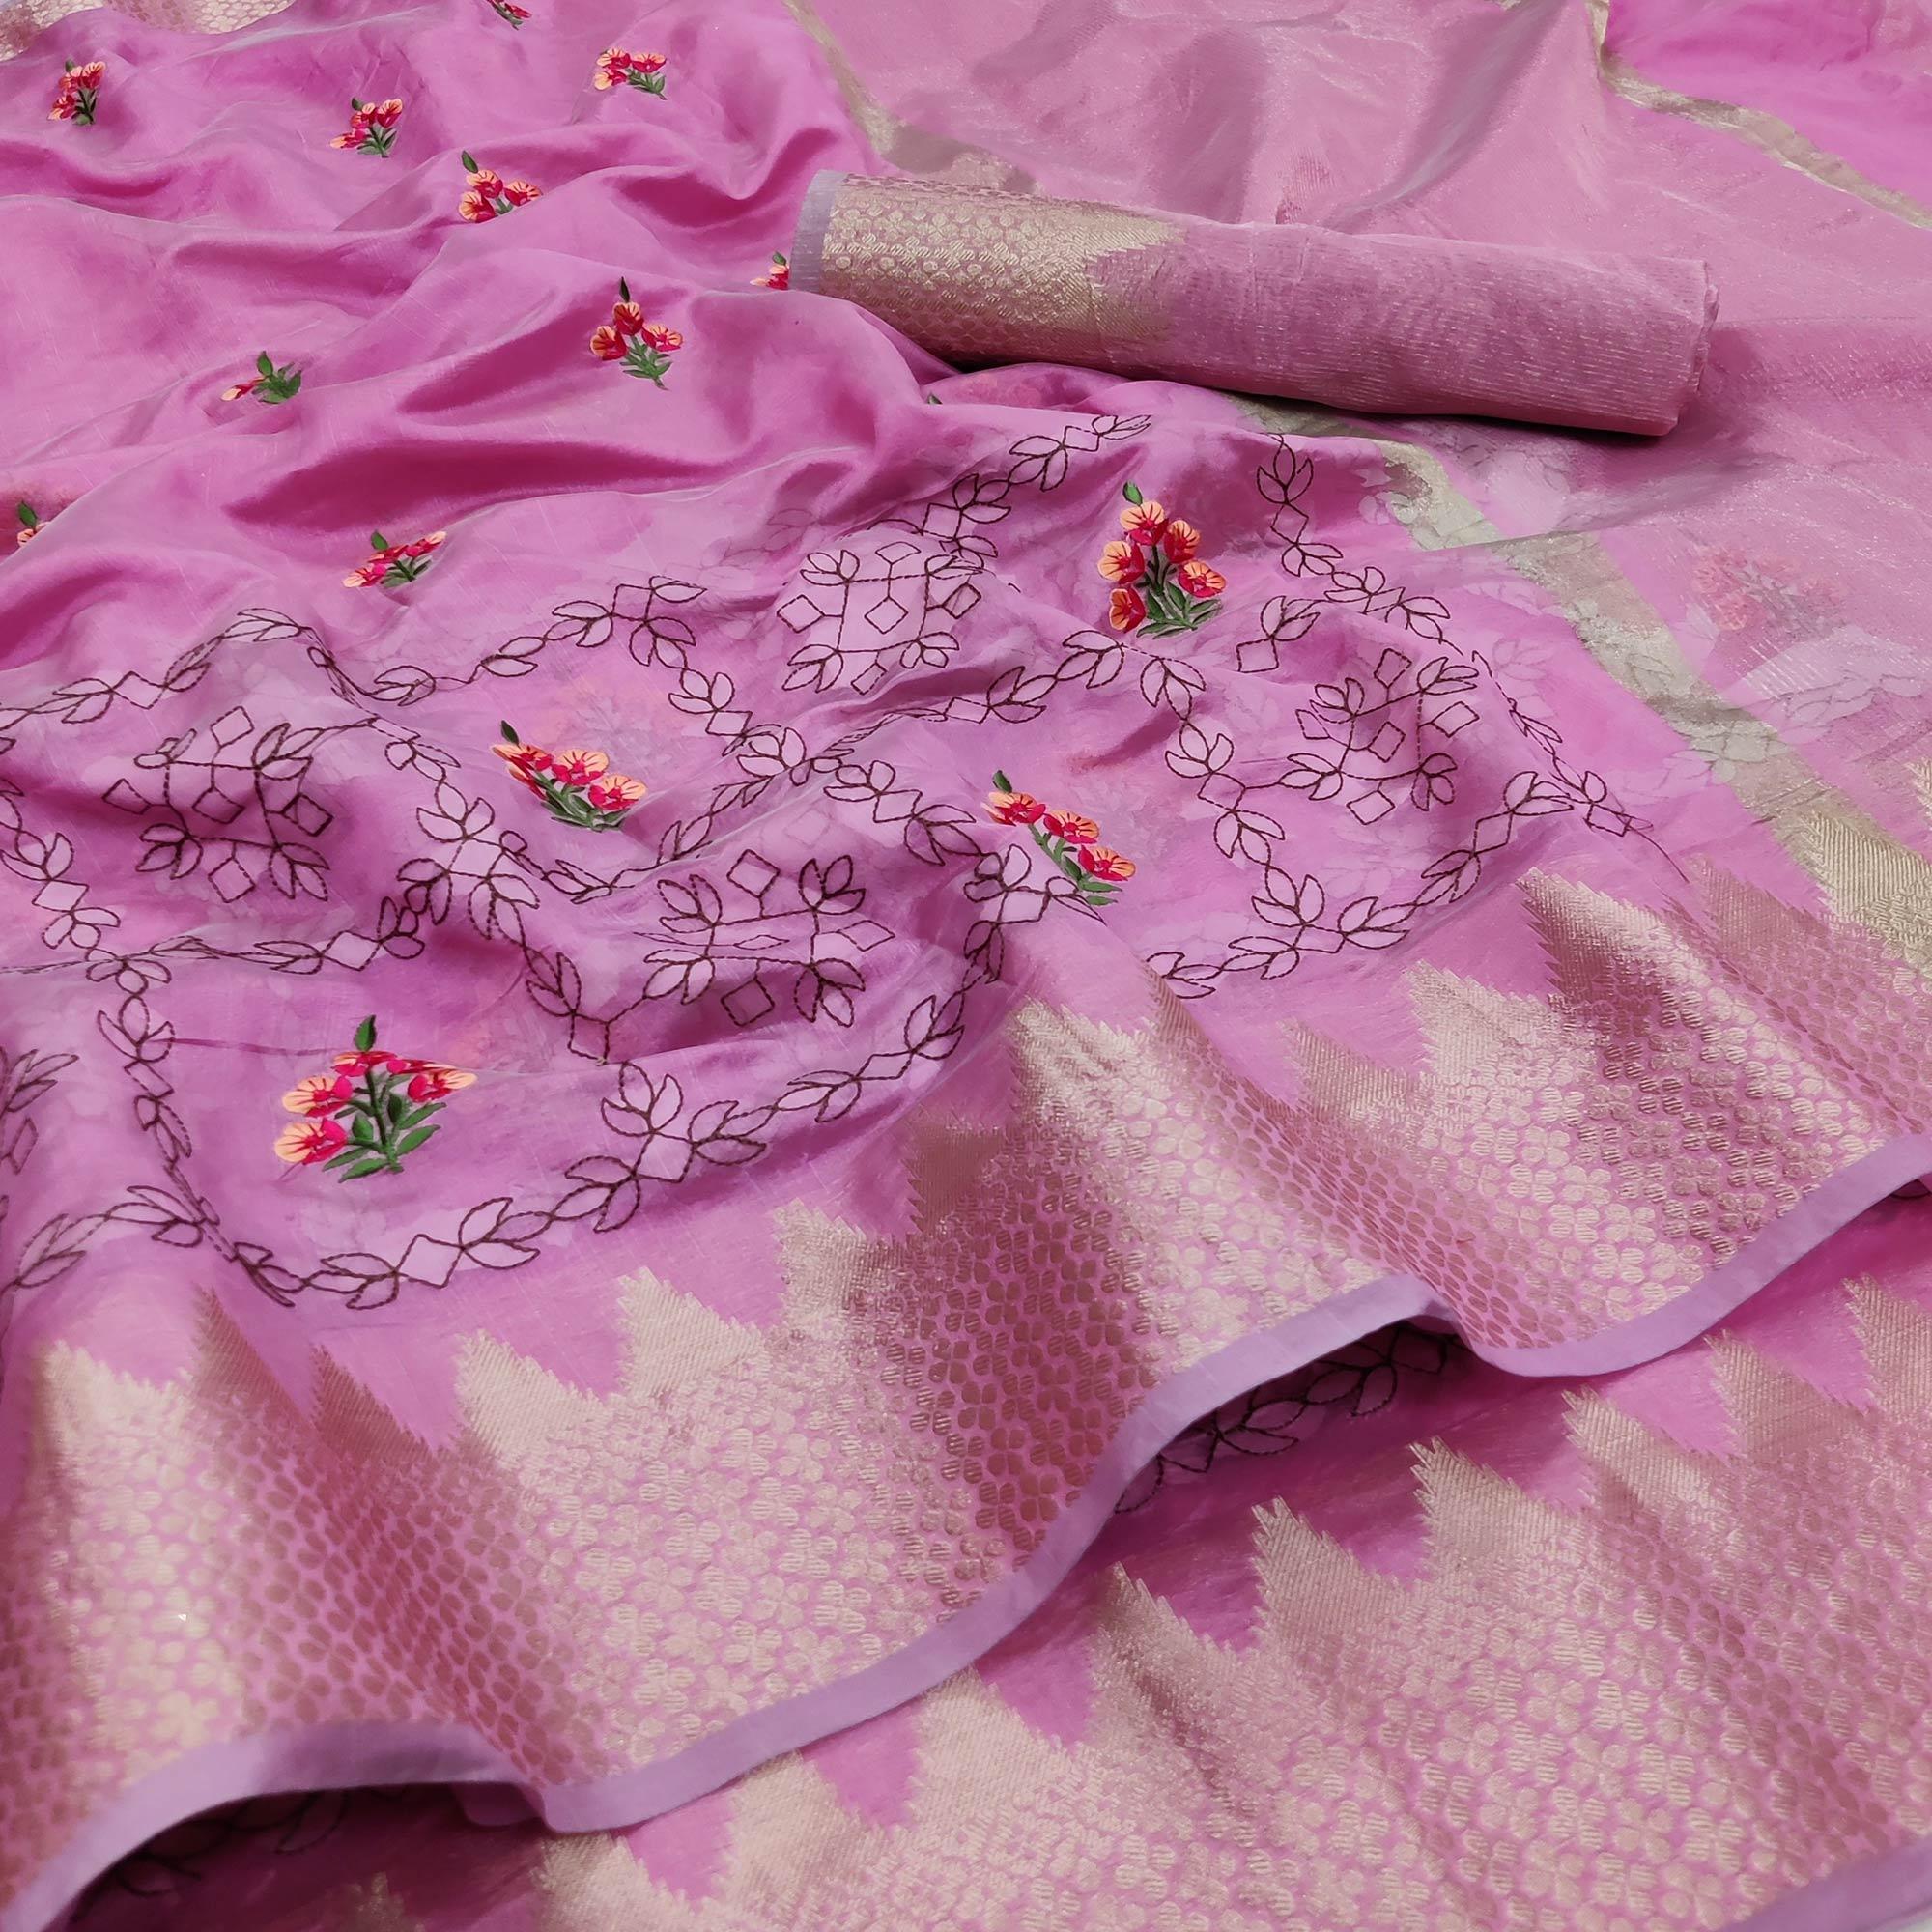 Pink Festive Wear Woven Organza Saree With Floral Embroidery Butta Work - Peachmode